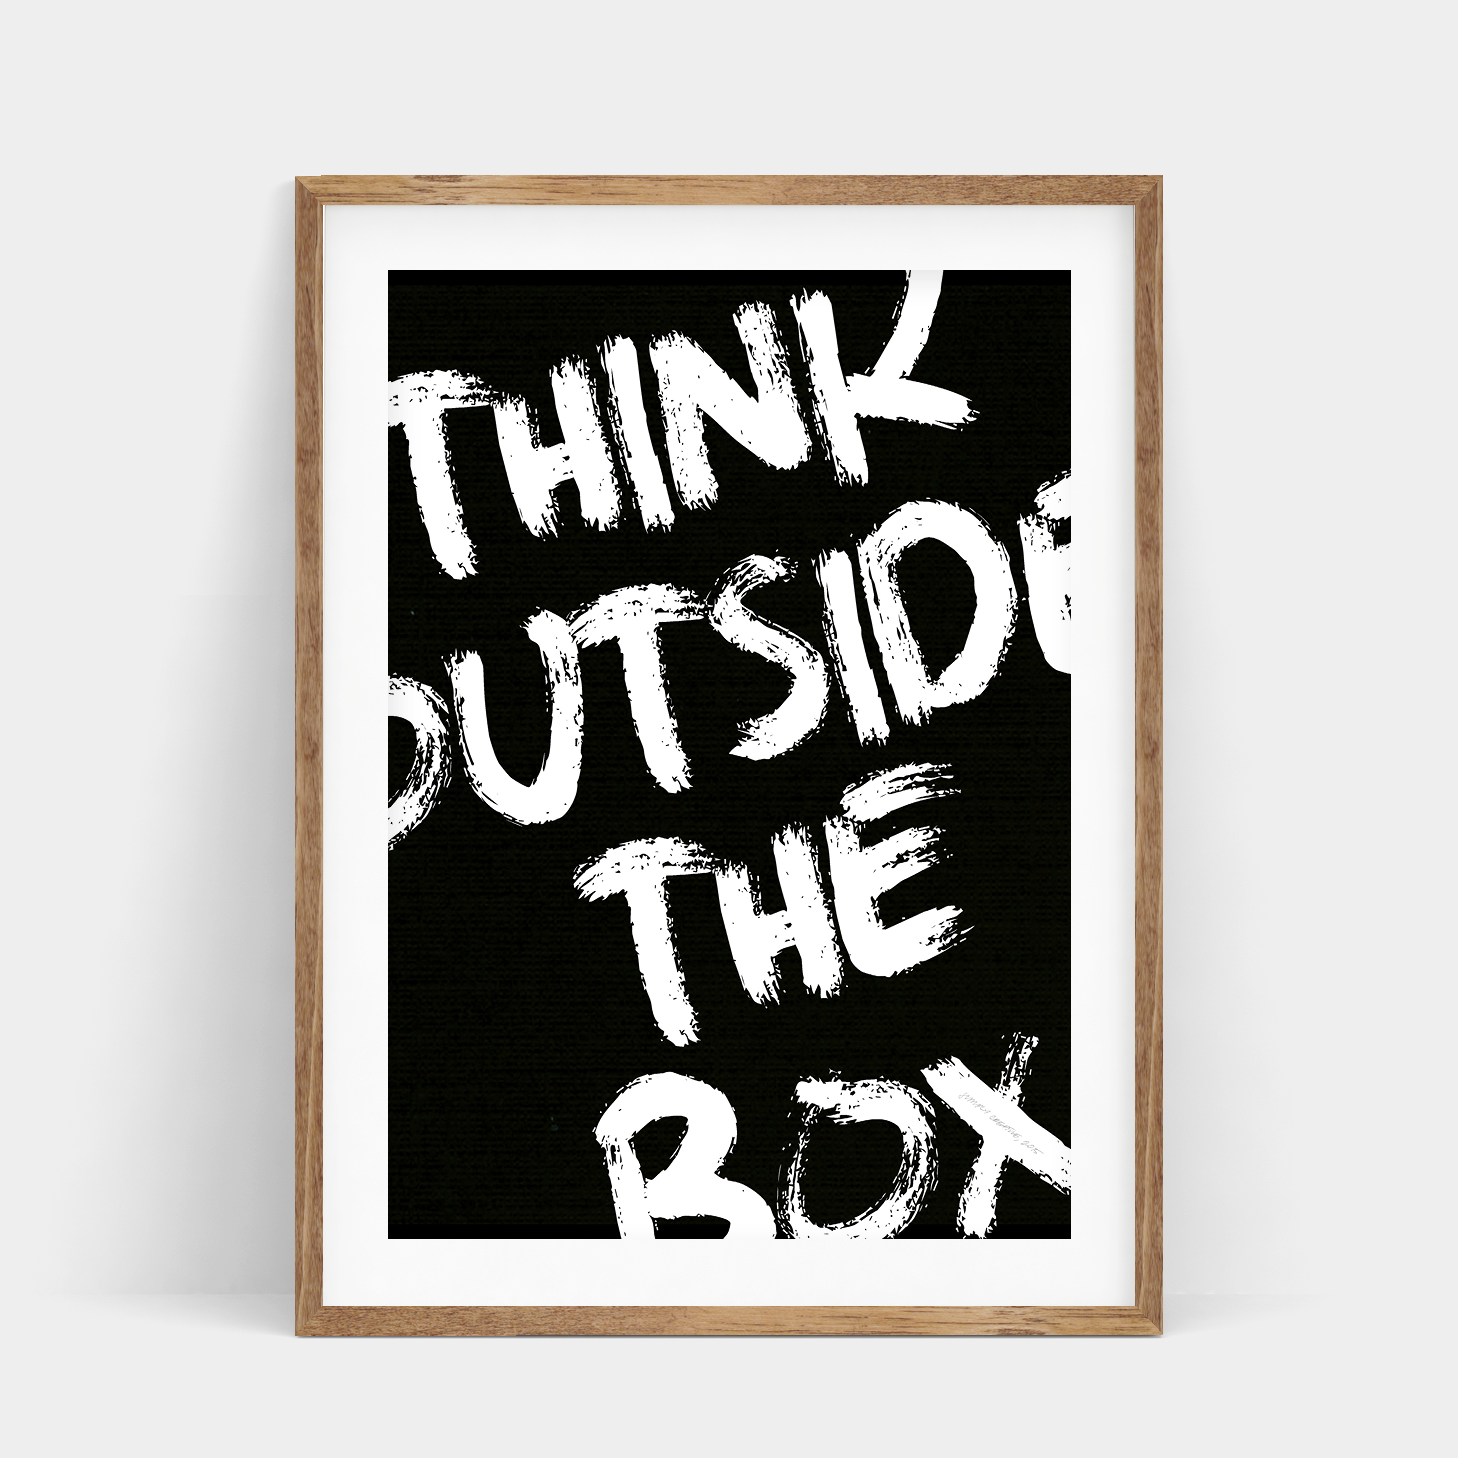 THINK OUTSIDE THE BOX